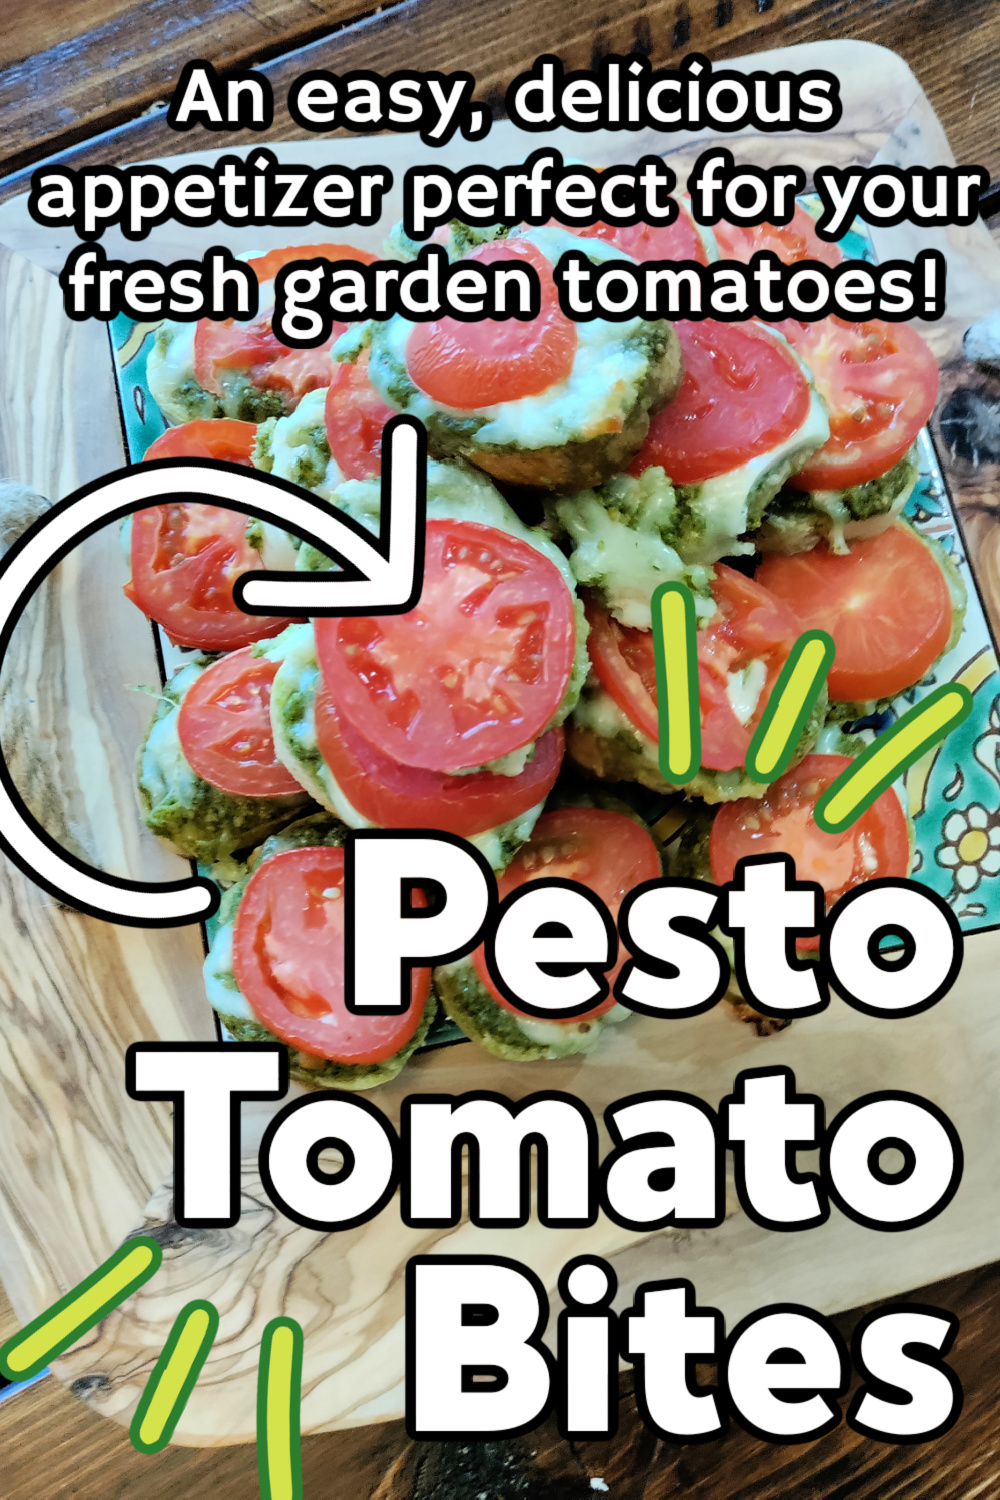 Pesto Tomato Bites with a text overlay that says, "an easy delicious appetizer perfect for your fresh garden tomatoes" and another text that says, "pesto tomato bites".